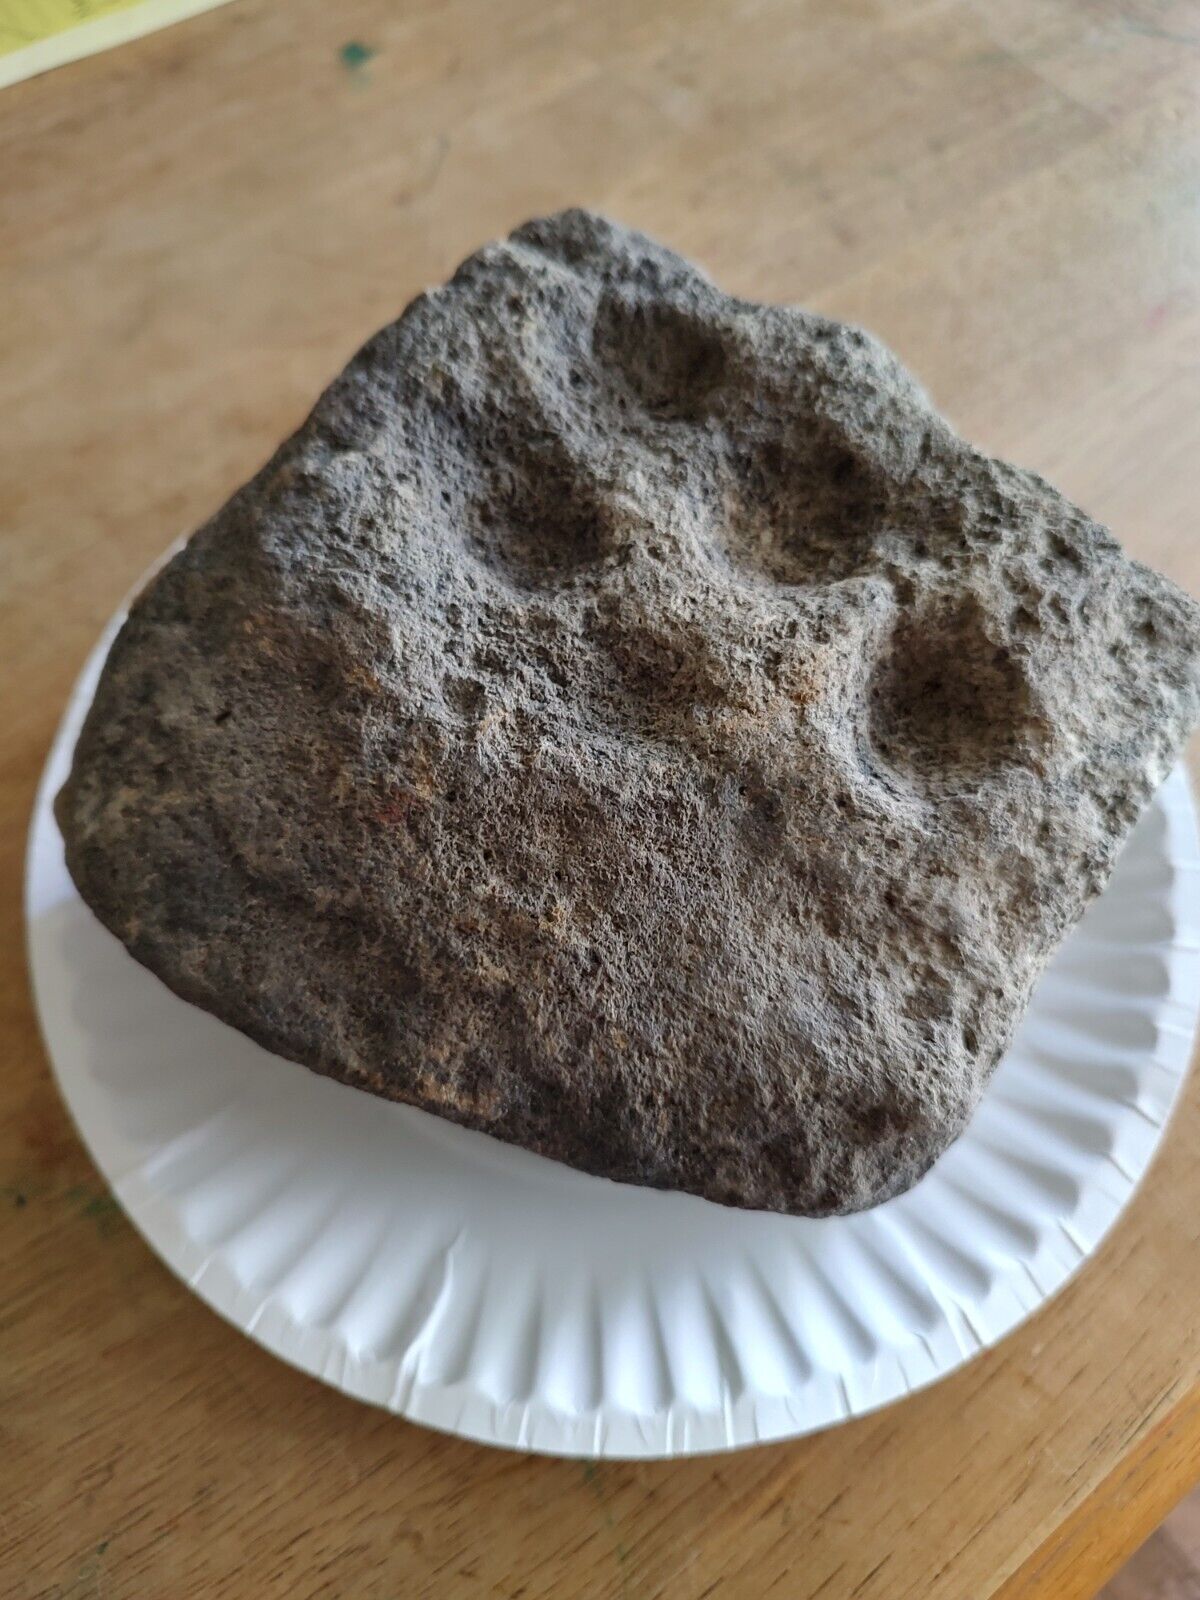 Ancient Native American nutting stone genuine artifact